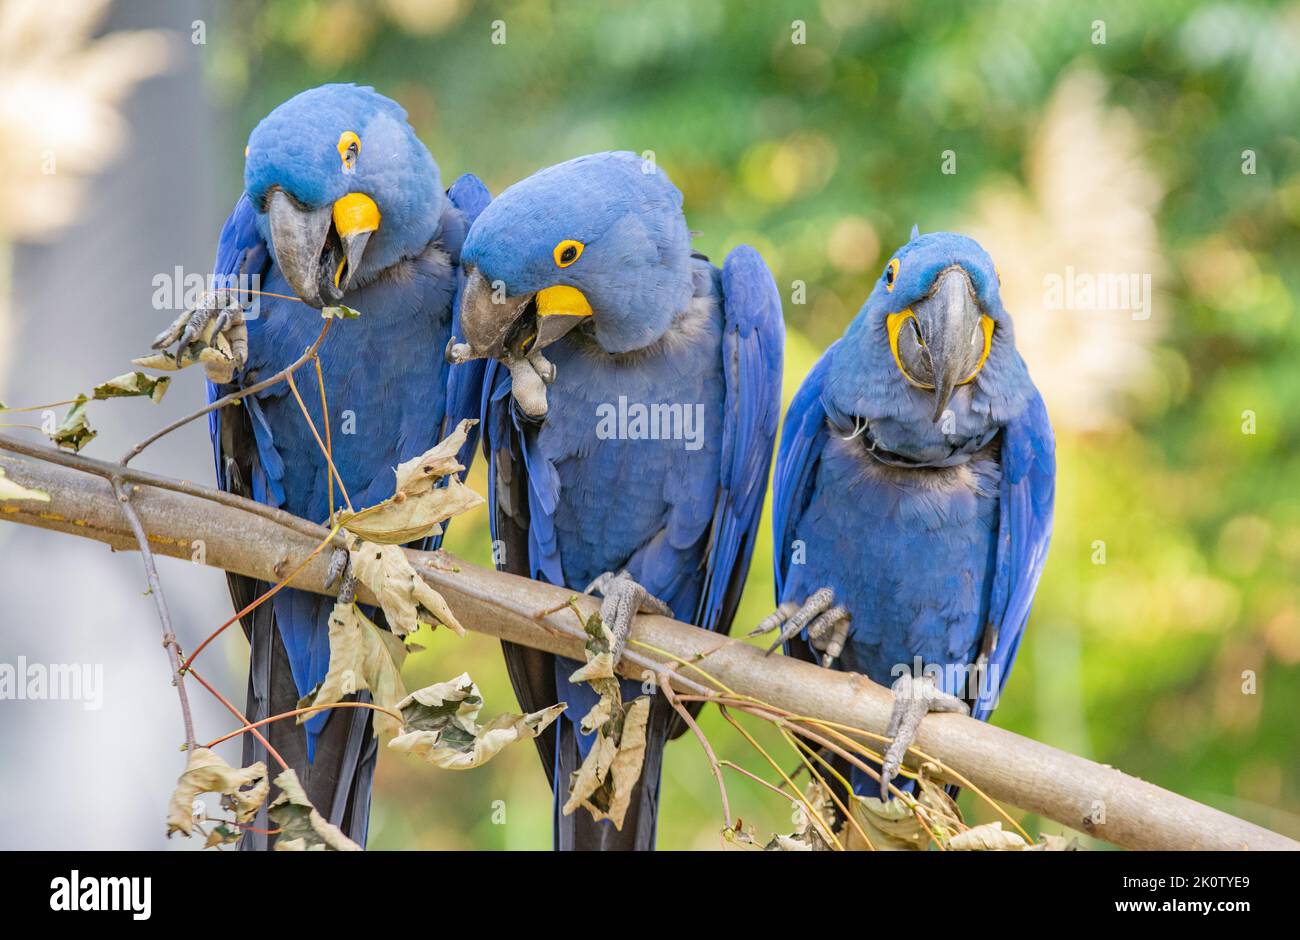 The hyacinth macaw is a blue-eyed parrot endemic to South America. With a weight of up to 1.3 kg and a length of up to one meter, the hyacinth macaw i Stock Photo